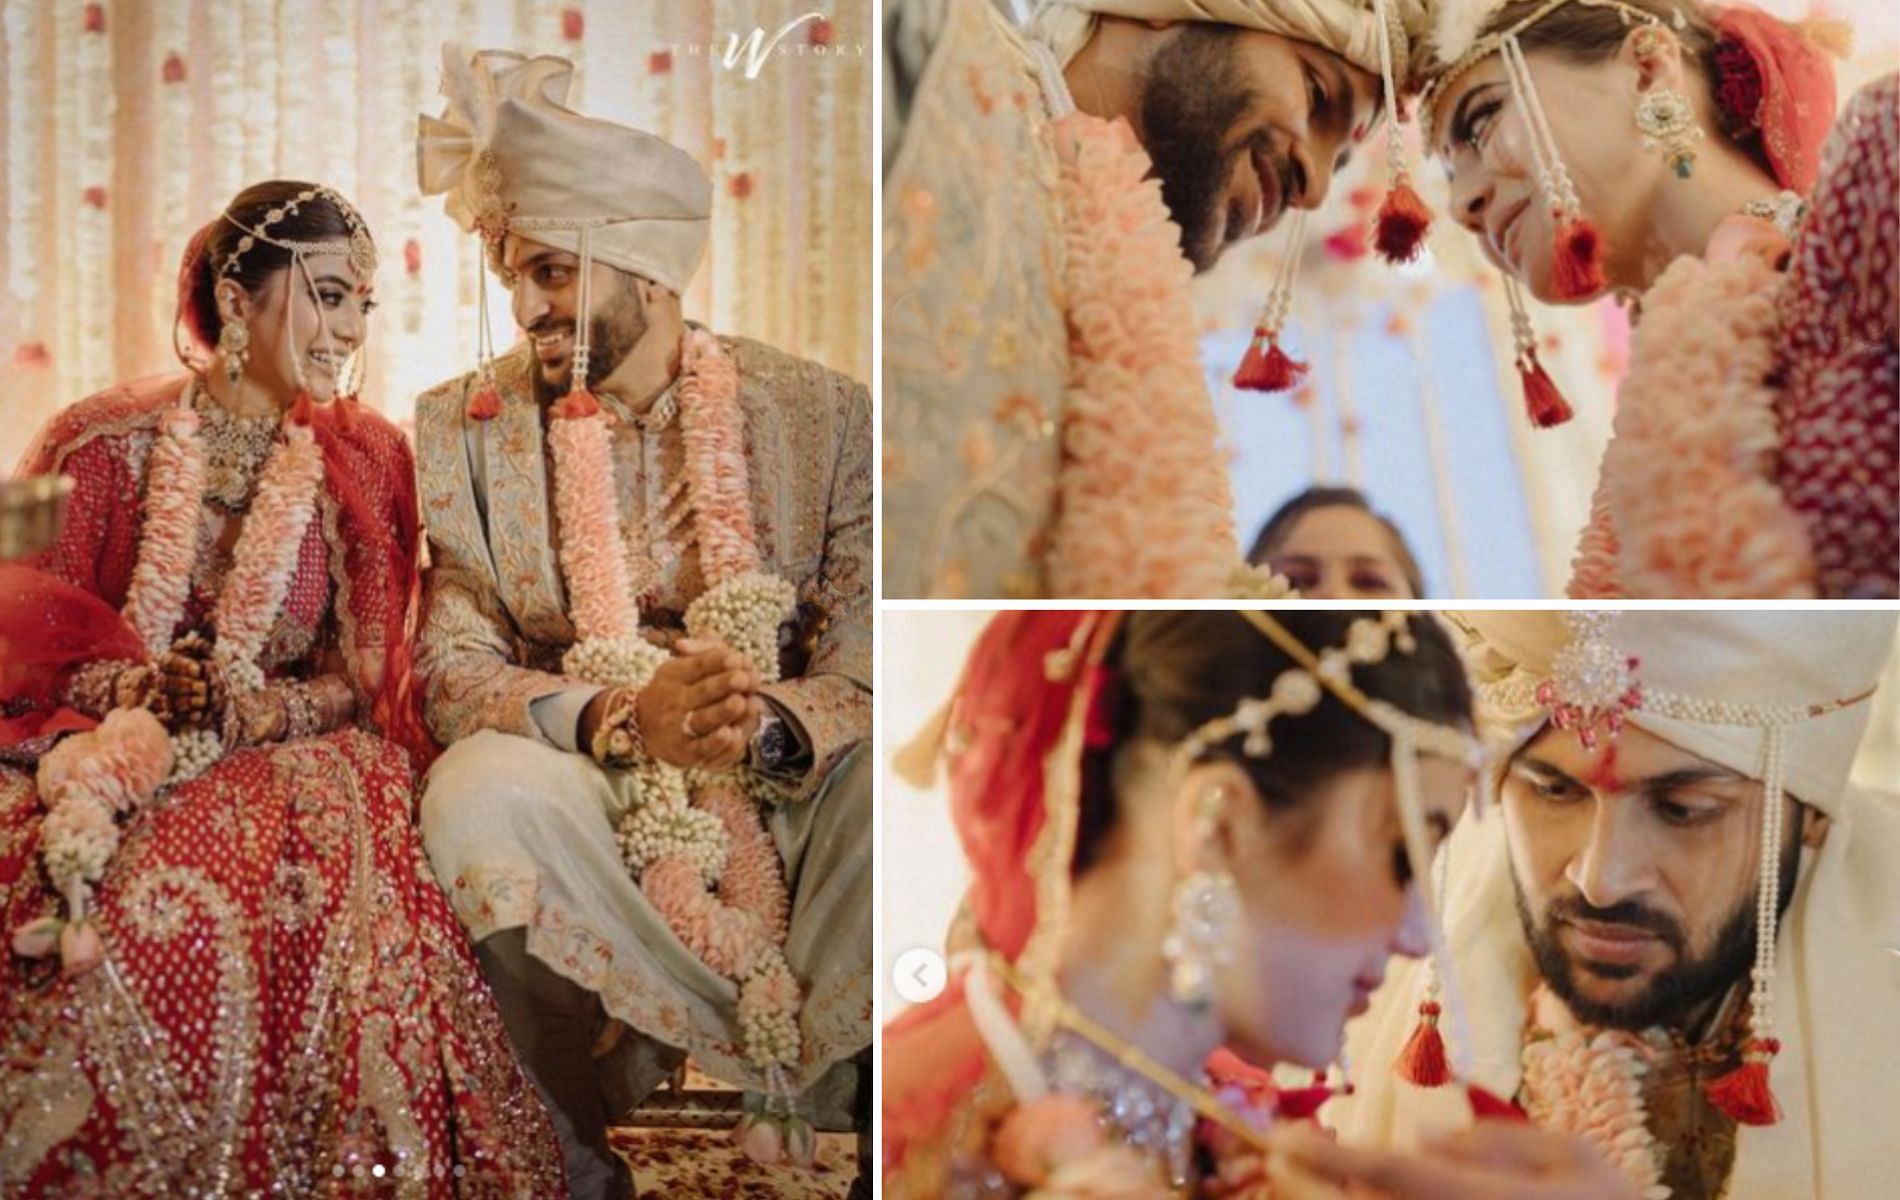 In Pictures] Shardul Thakur ties the knot with Mittali Parulkar, shares  heartwarming message for wife